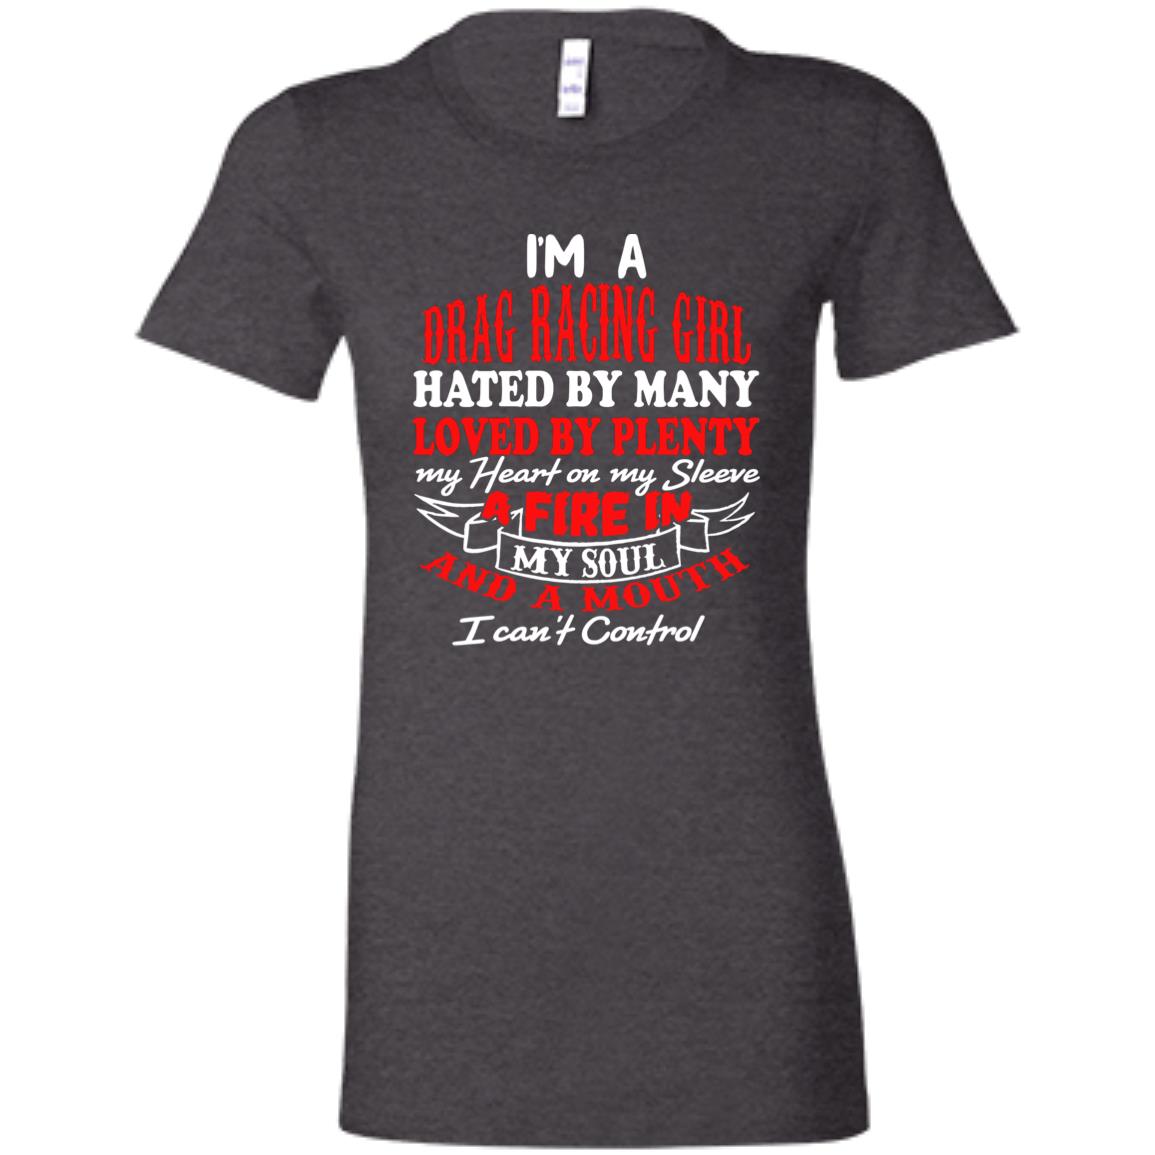 I'm A Drag Racing Girl Hated By Many Loved By Plenty Ladies' Favorite T-Shirt